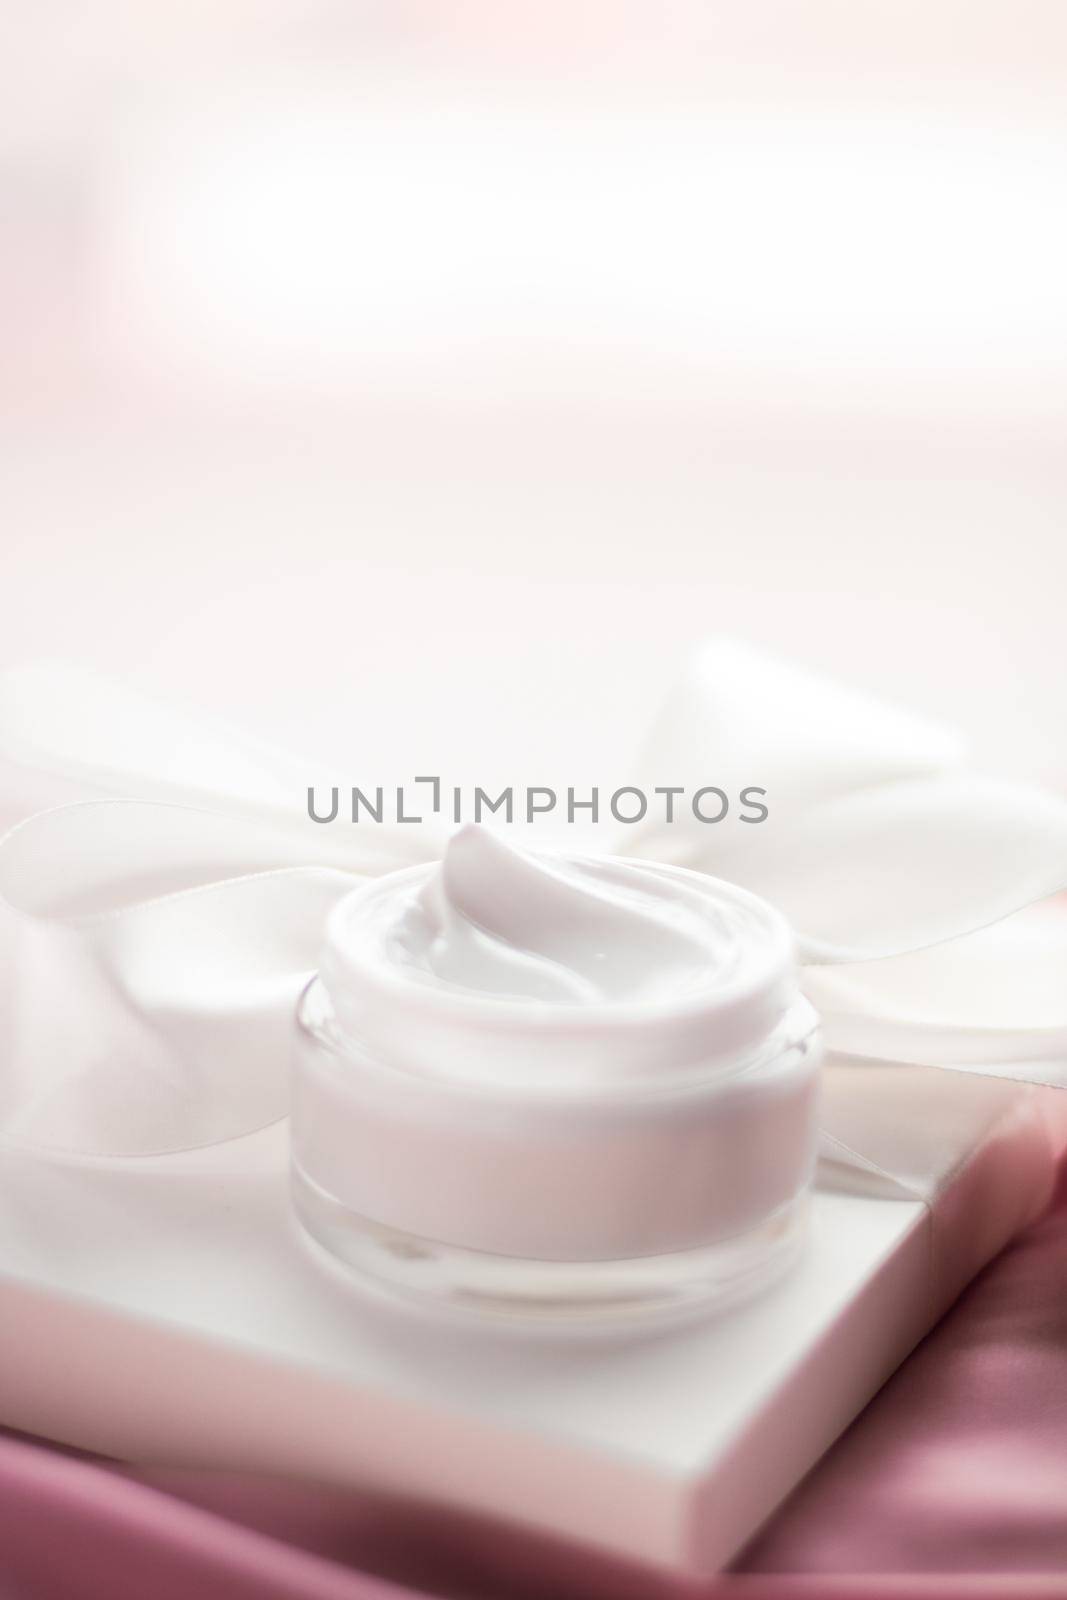 Beauty, cosmetics and skincare styled concept - Luxury moisturizing cream and a white gift box